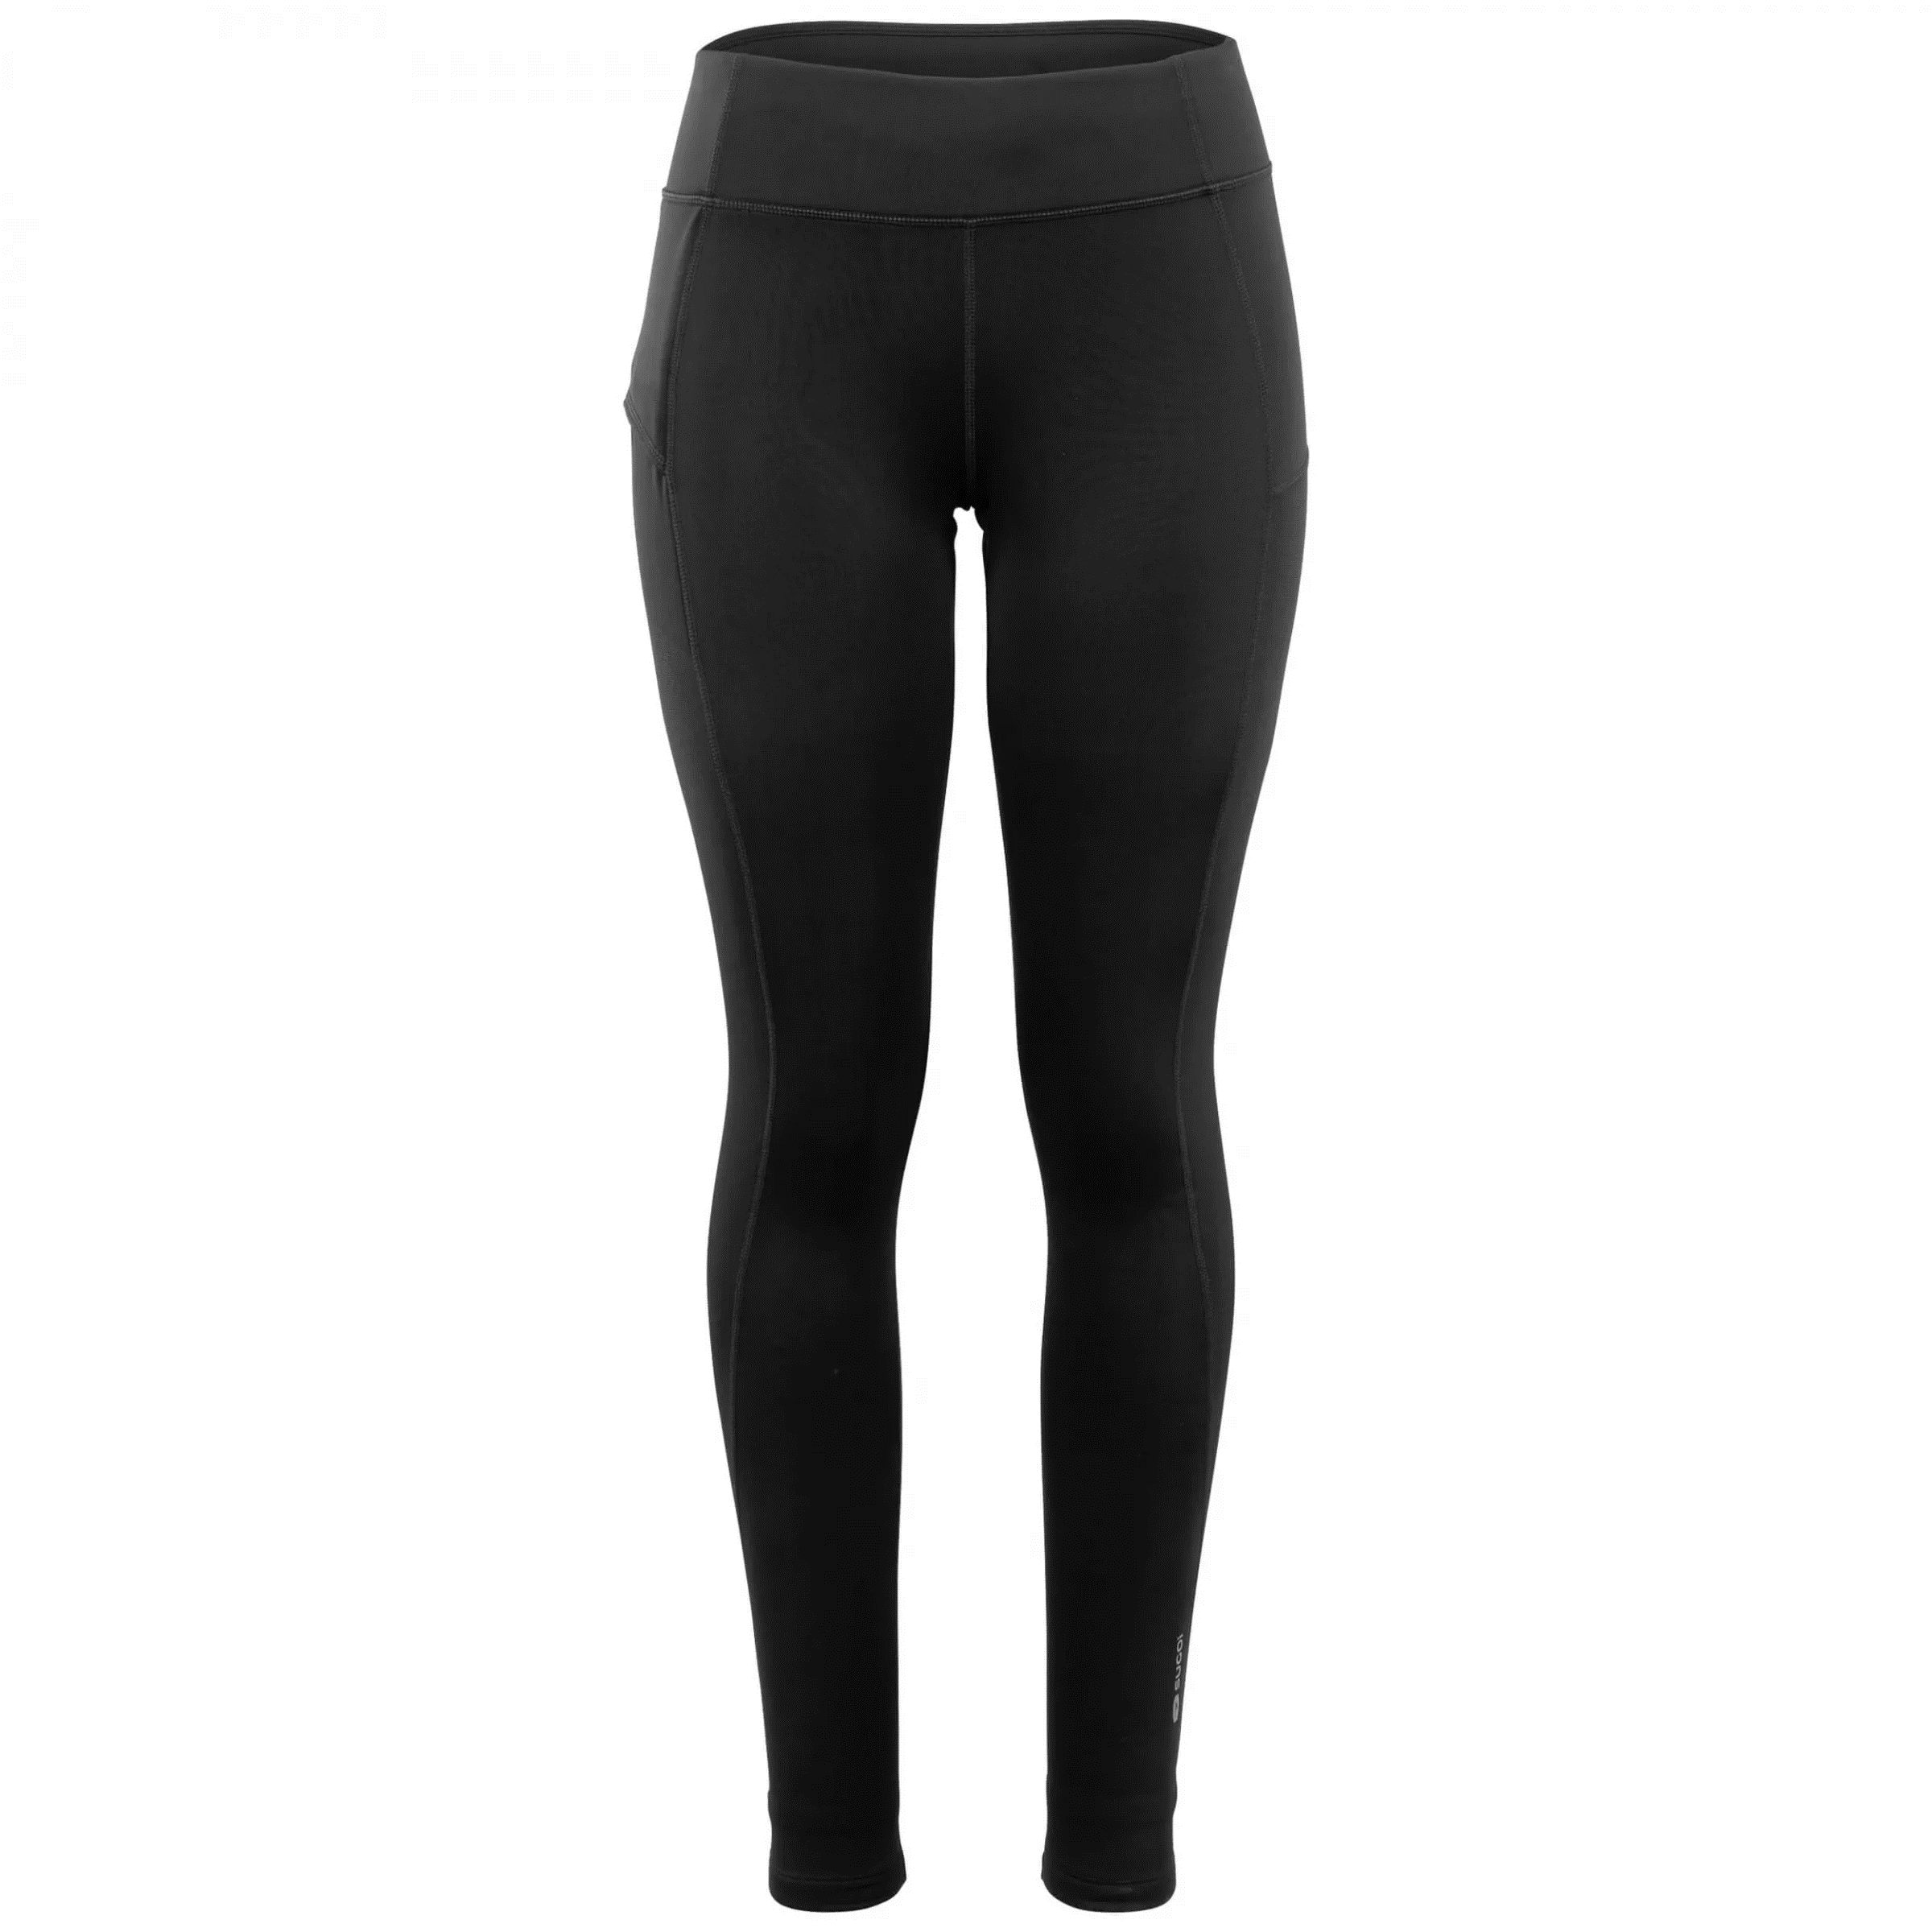 WOMEN'S SUBZERO TIGHTS  Performance Running Outfitters